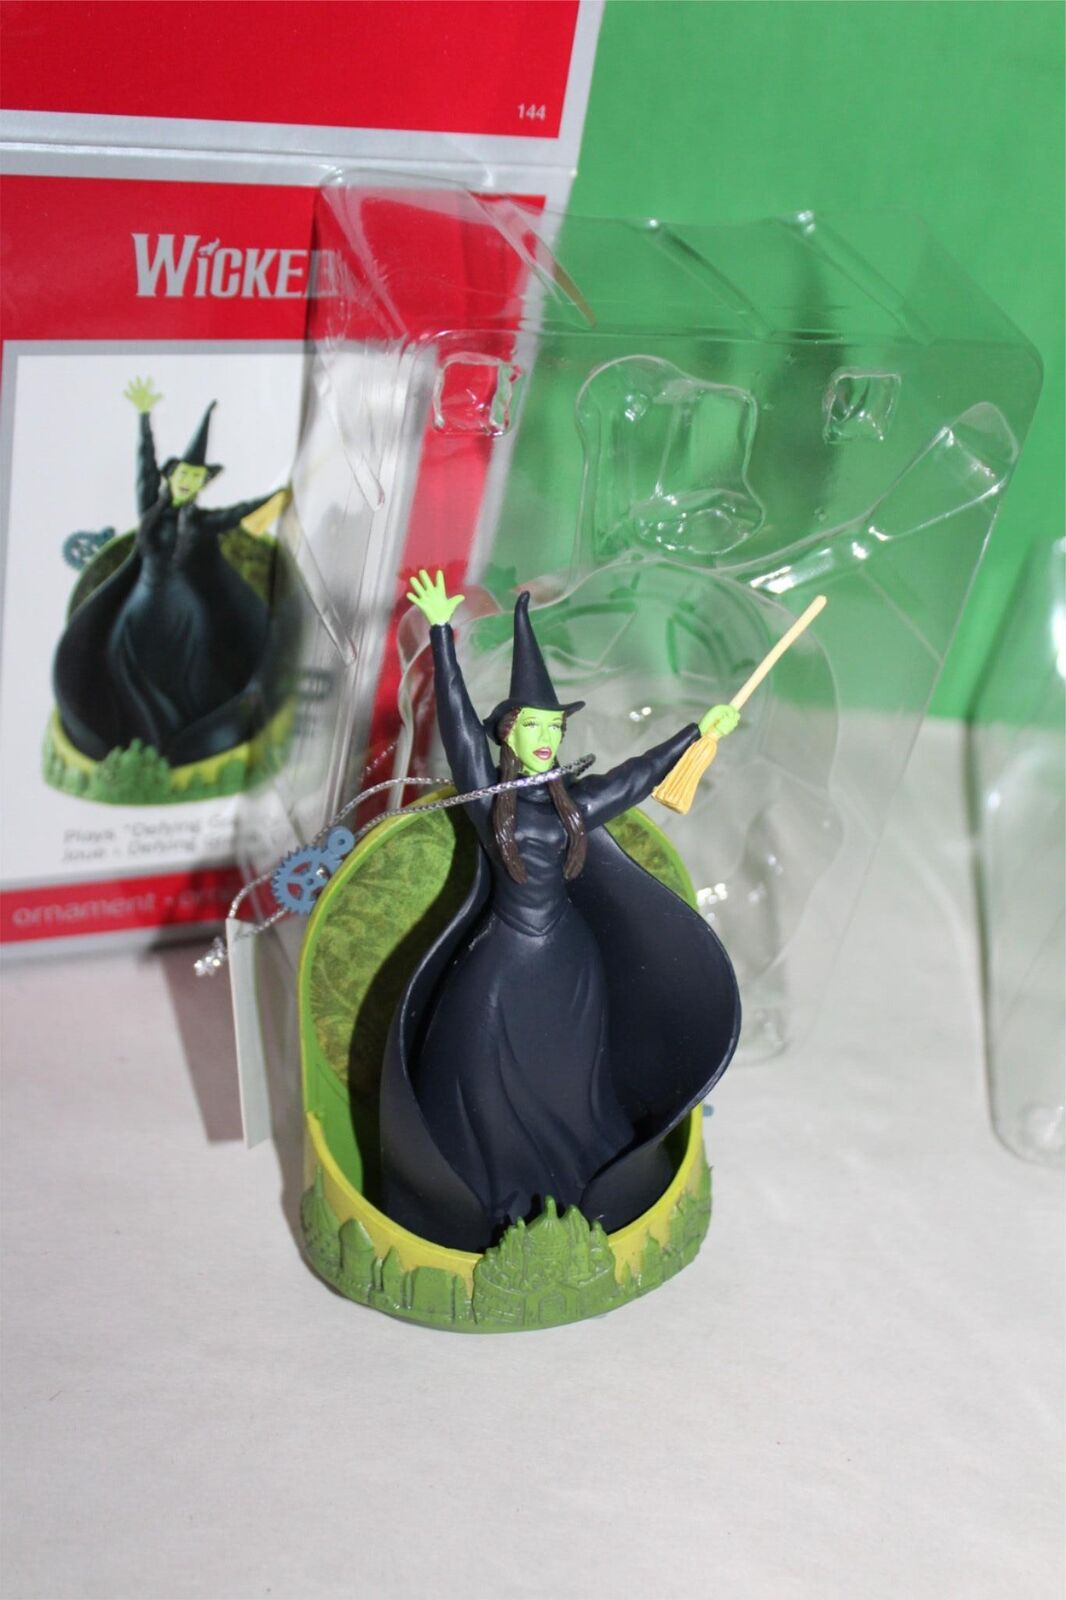 Carlton Heirloom Wicked Musical Defying Gravity Christmas Holiday Ornament 144